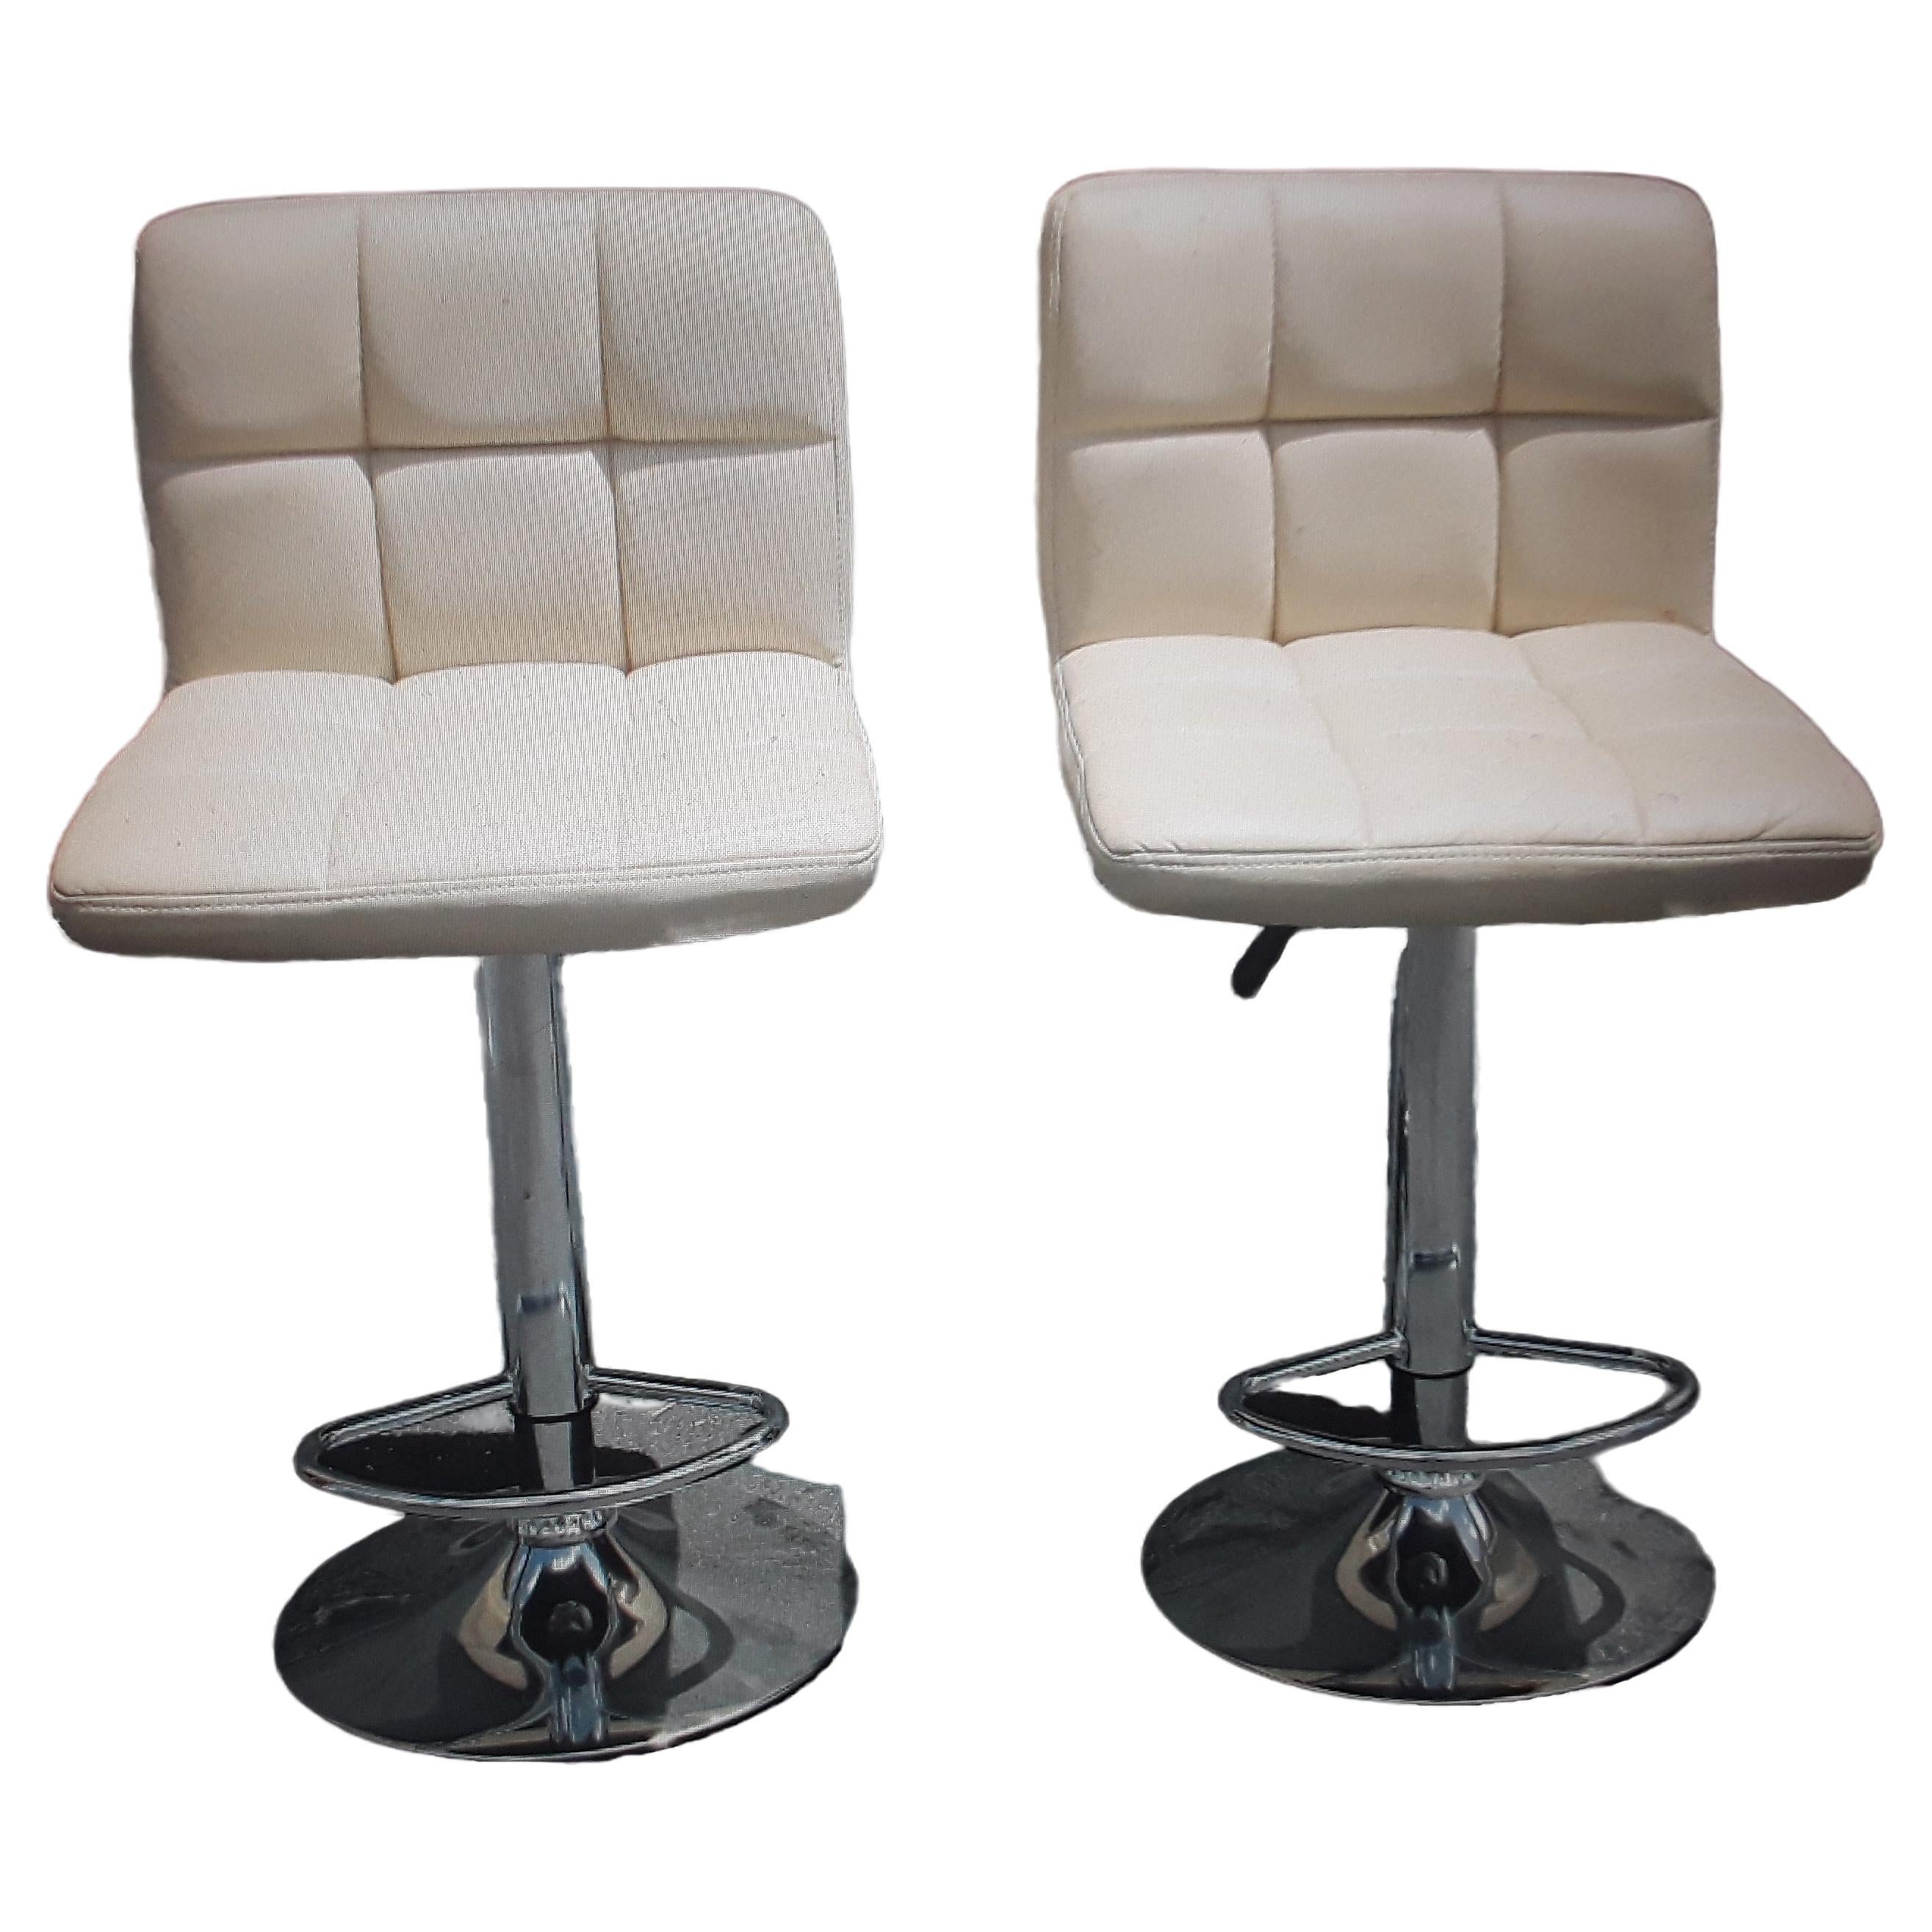 Pair 1970's Mid Century Modern Faux White Leather Adjustable Bar Stools